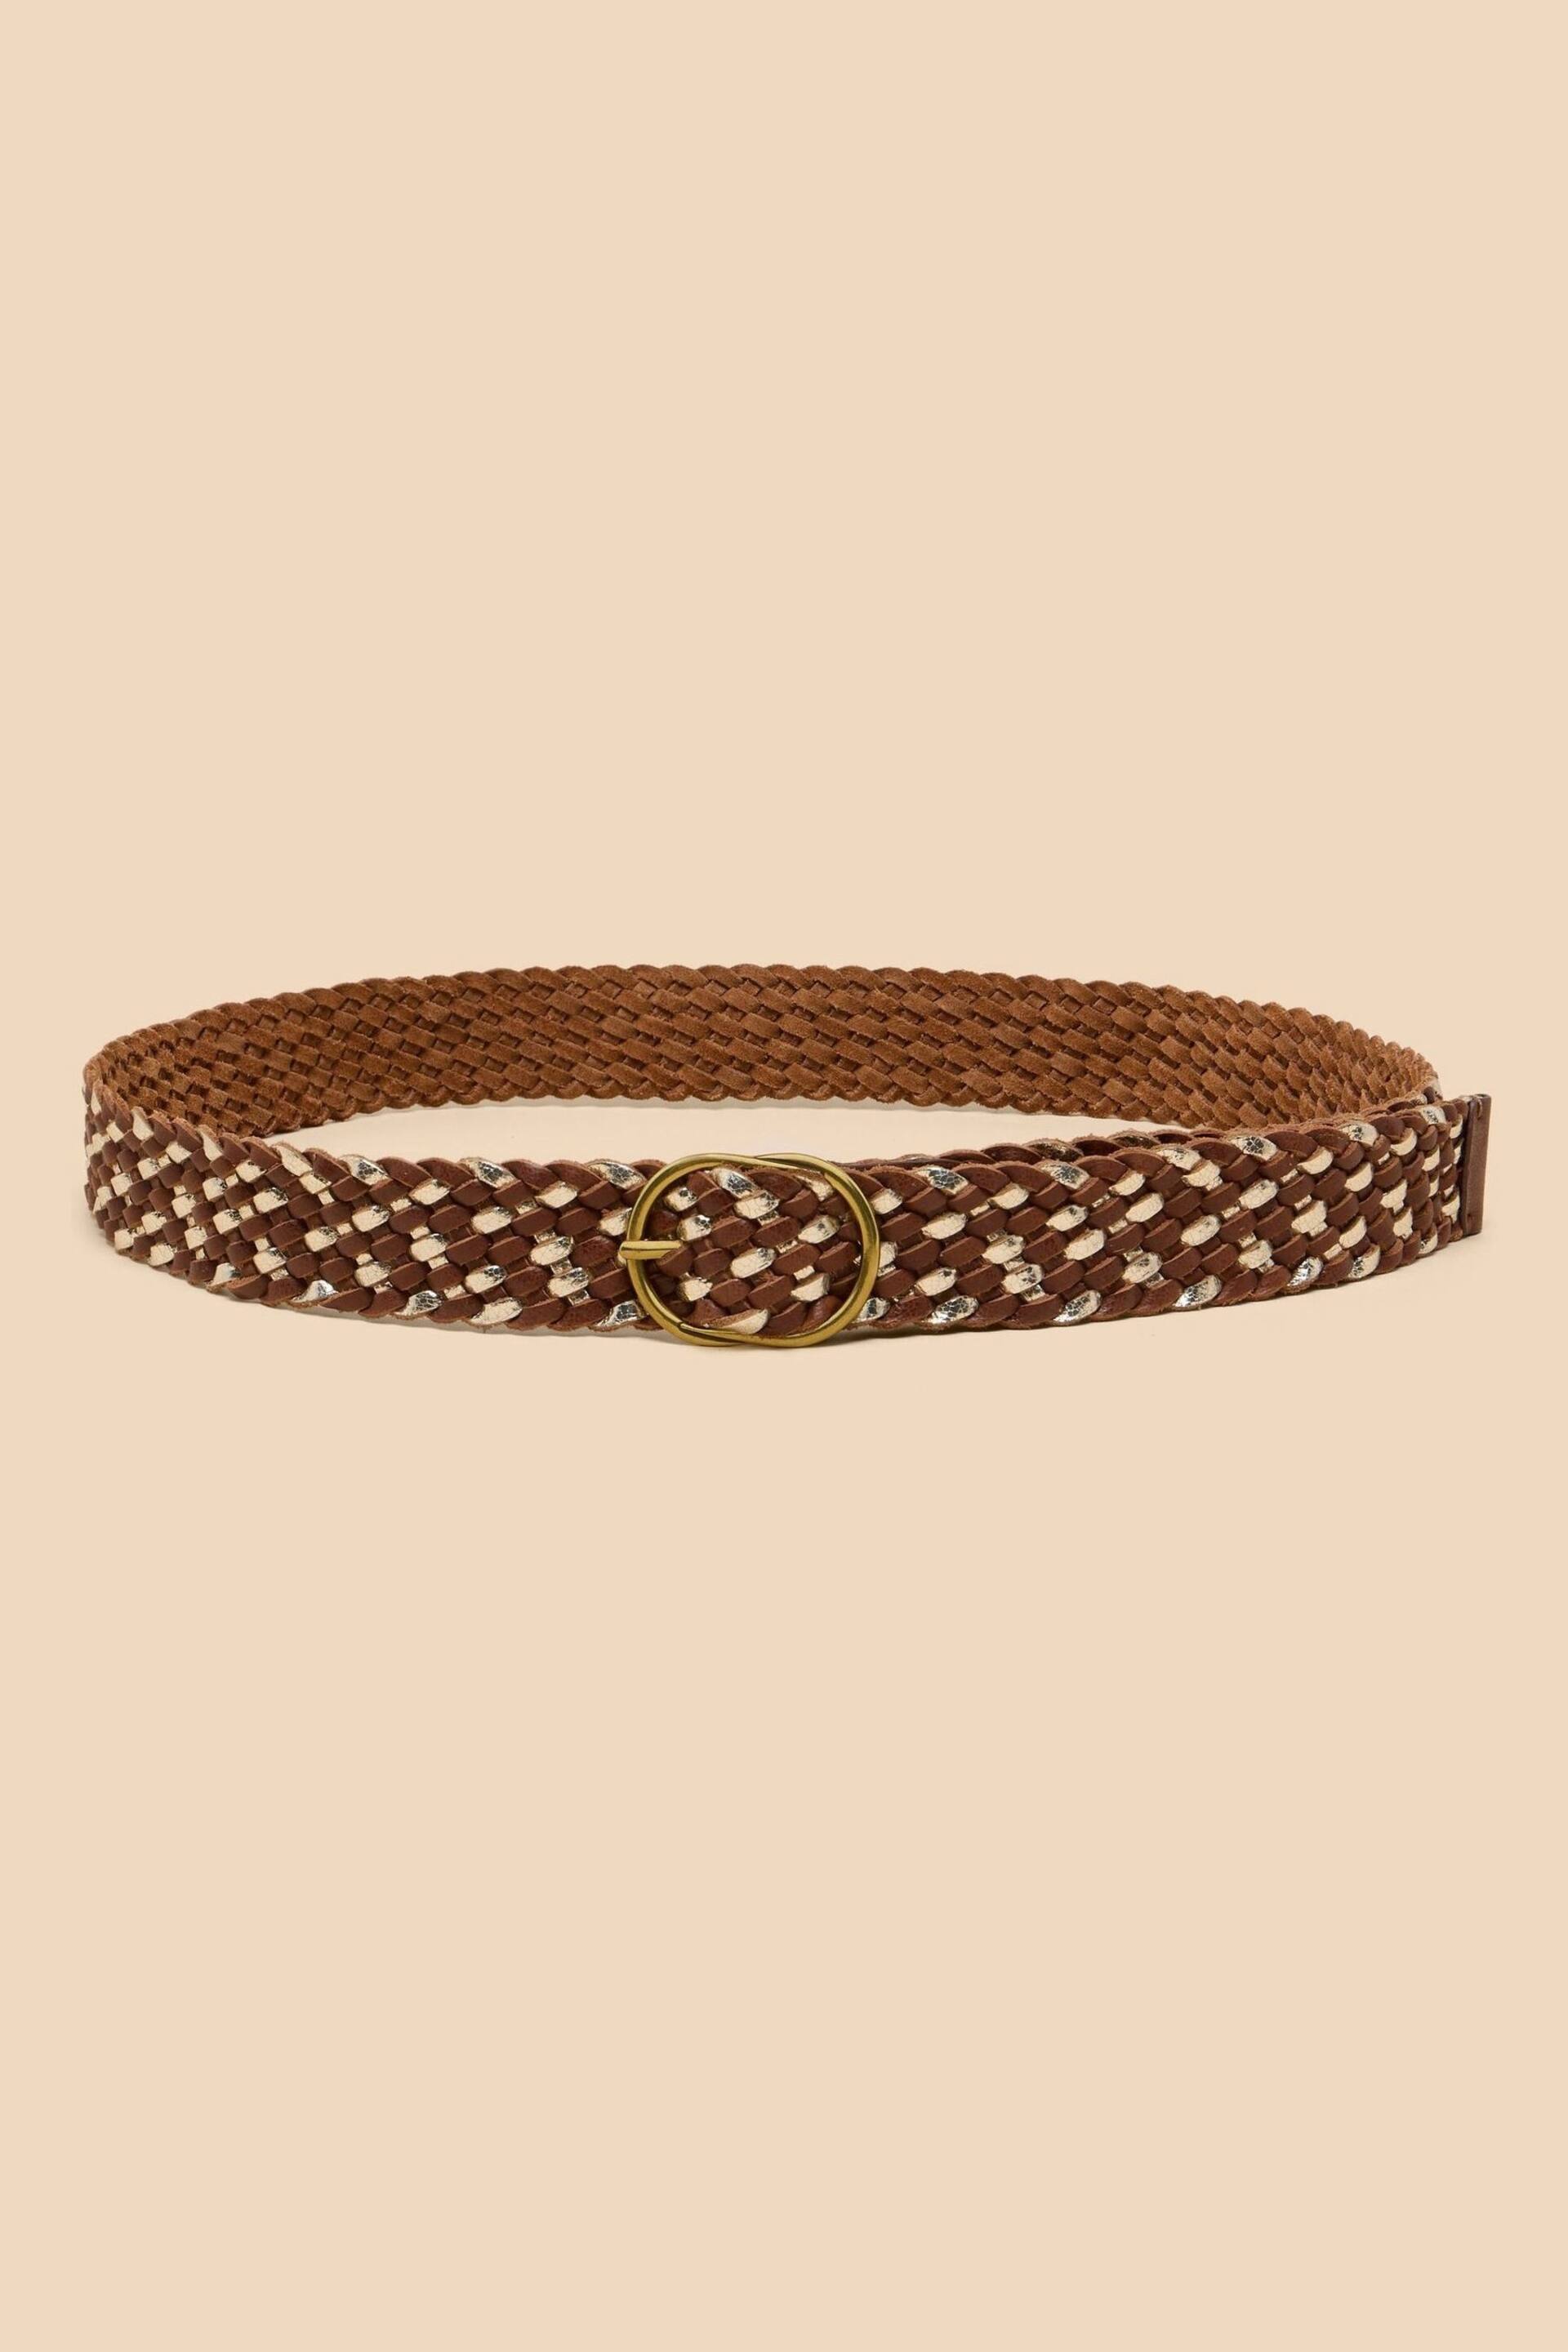 White Stuff Brown Leather Weave Belt - Image 2 of 3